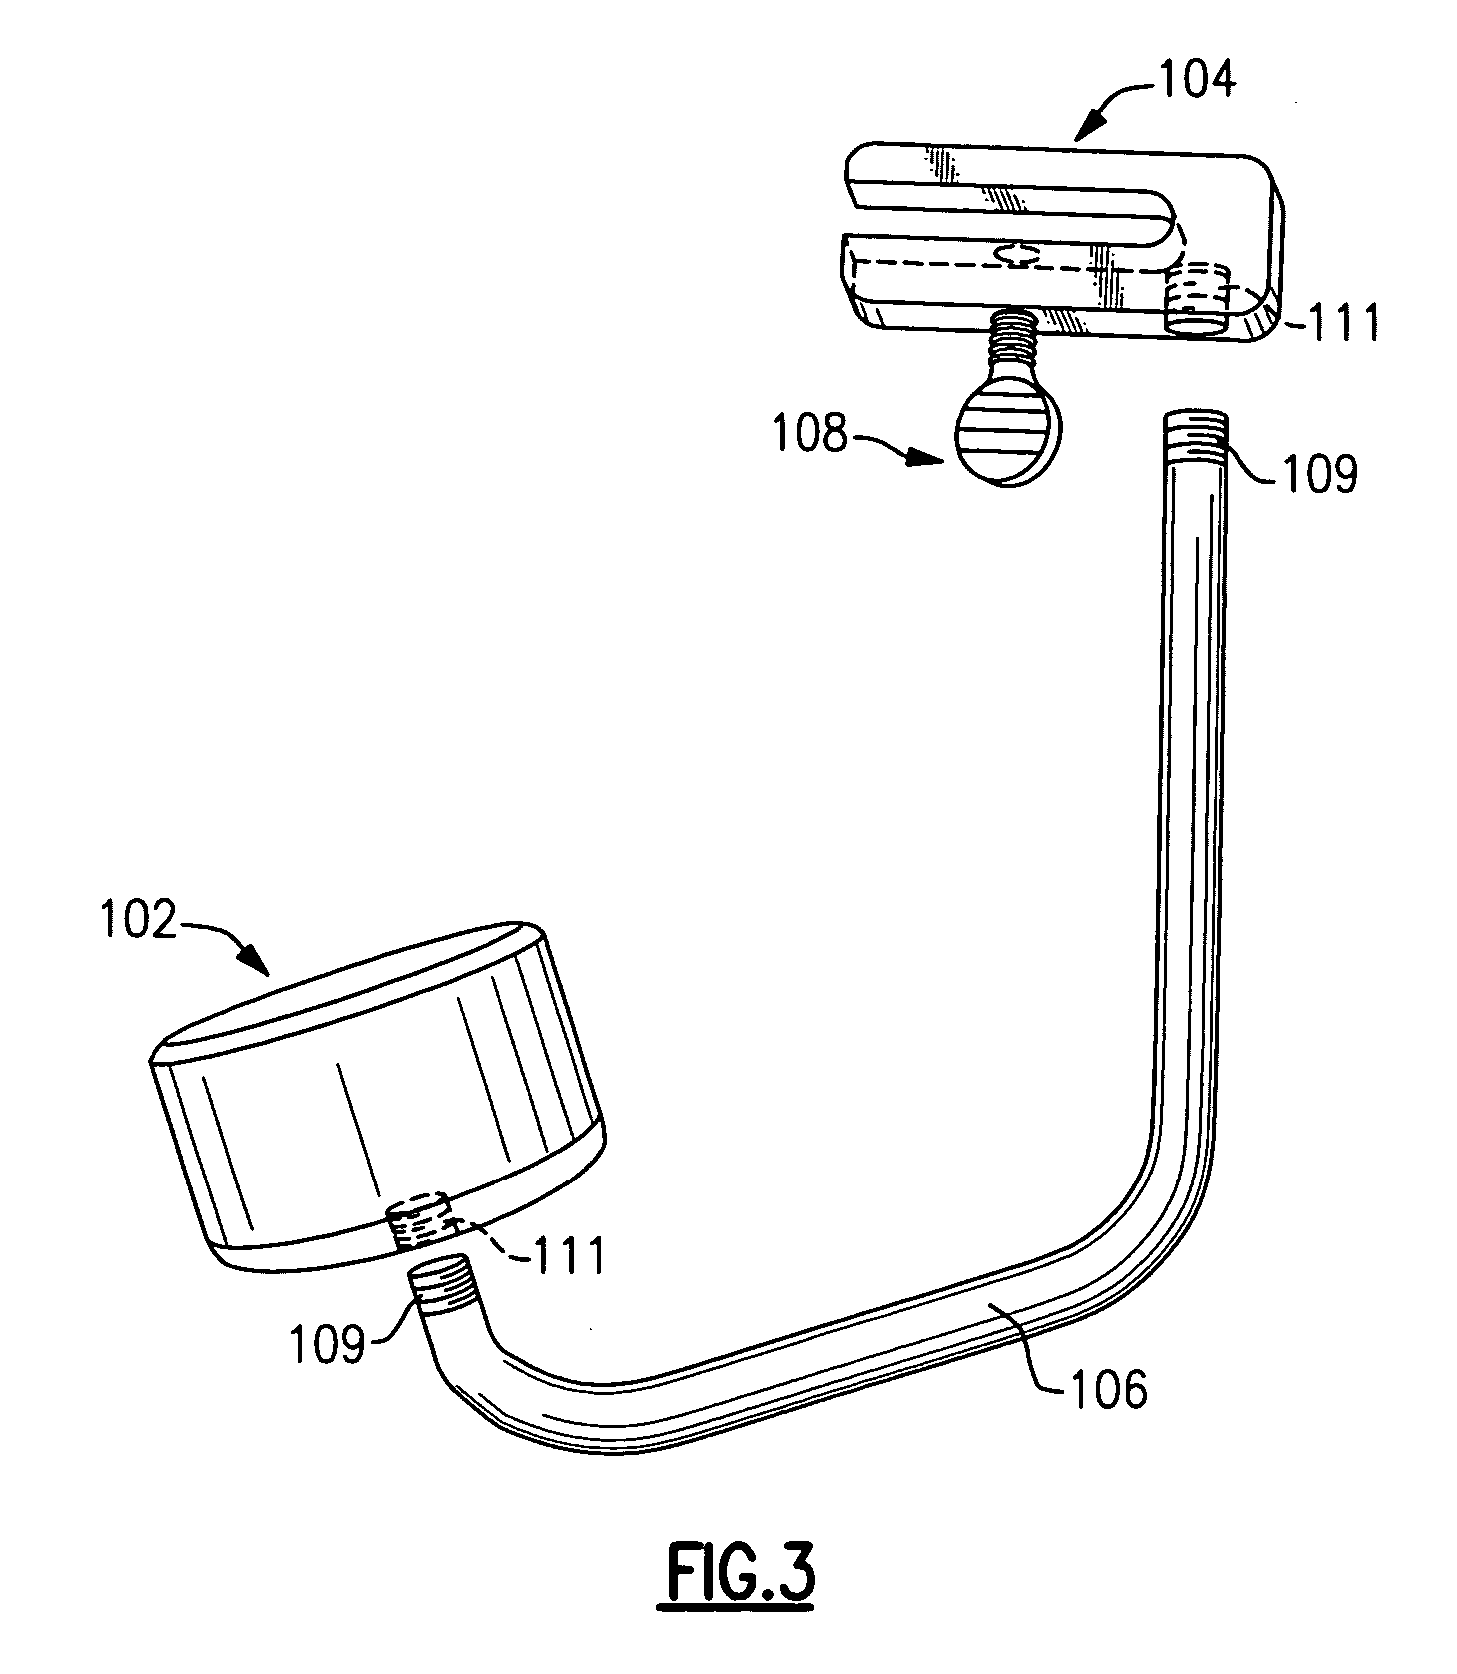 Apparatus for administration of aromatherapy on a massage table or chair